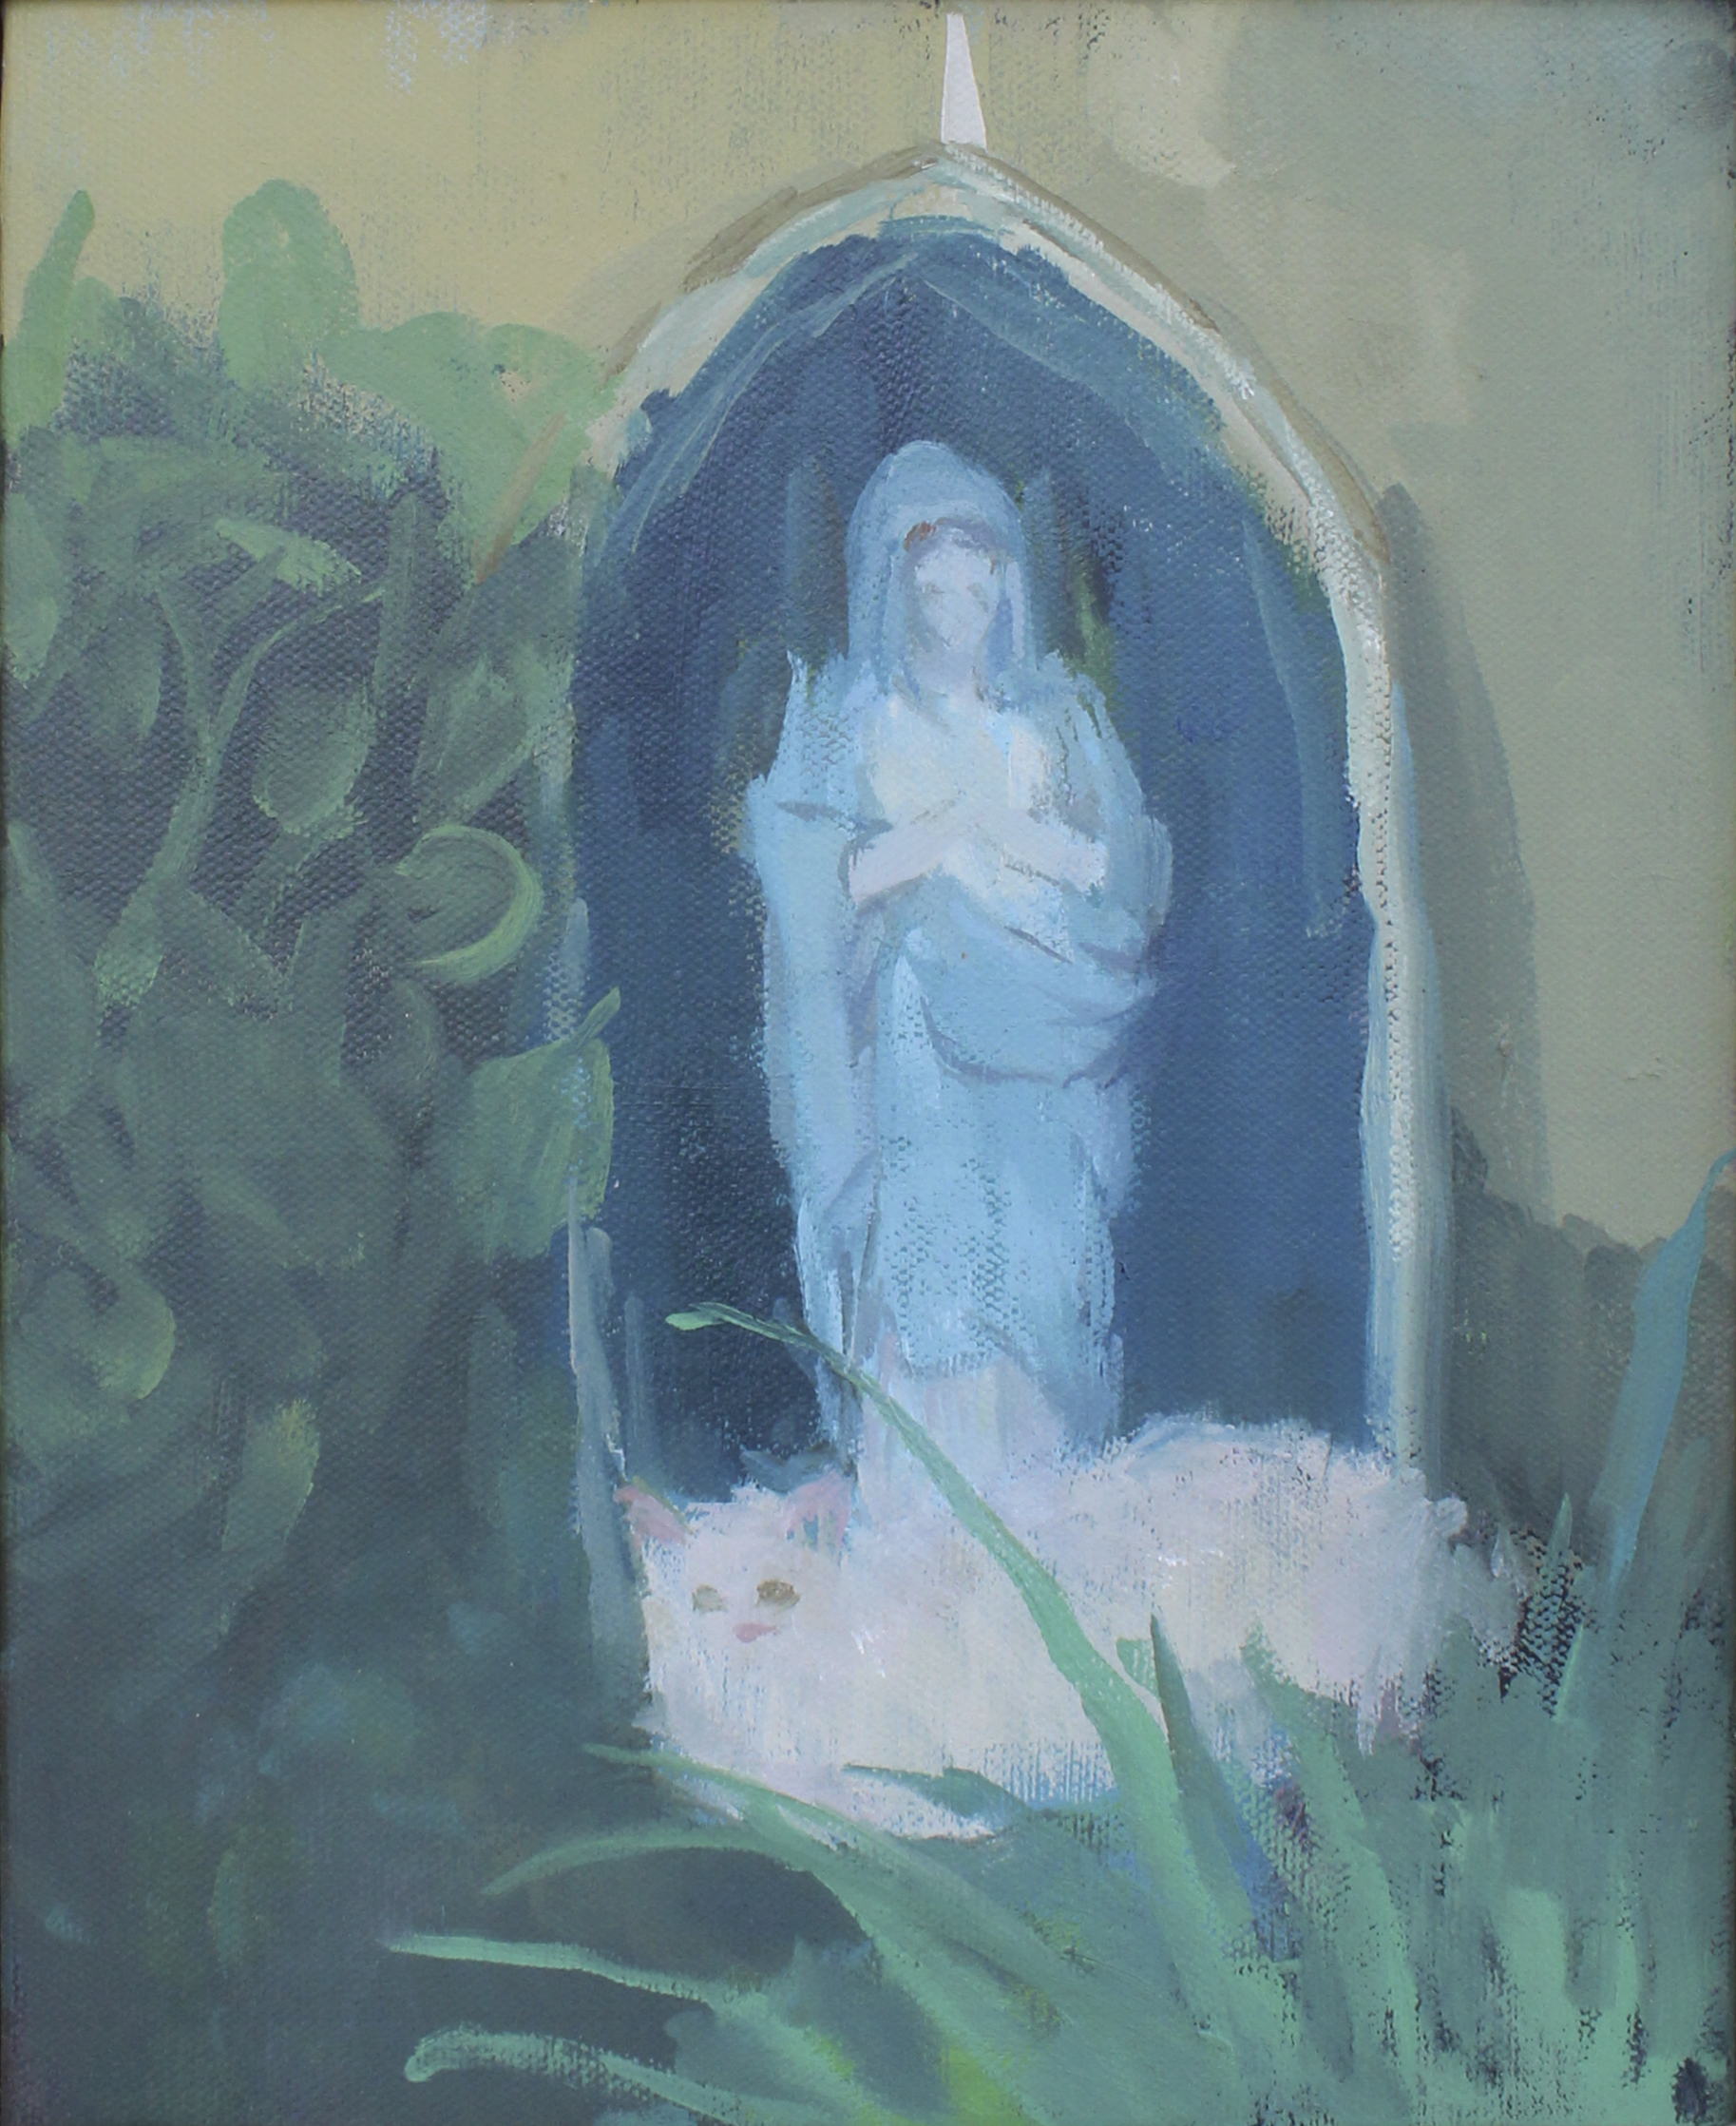    garden with white cat and mother mary     oil on canvas 8x10" 2016  Private collection Tennessee  purchase prints   